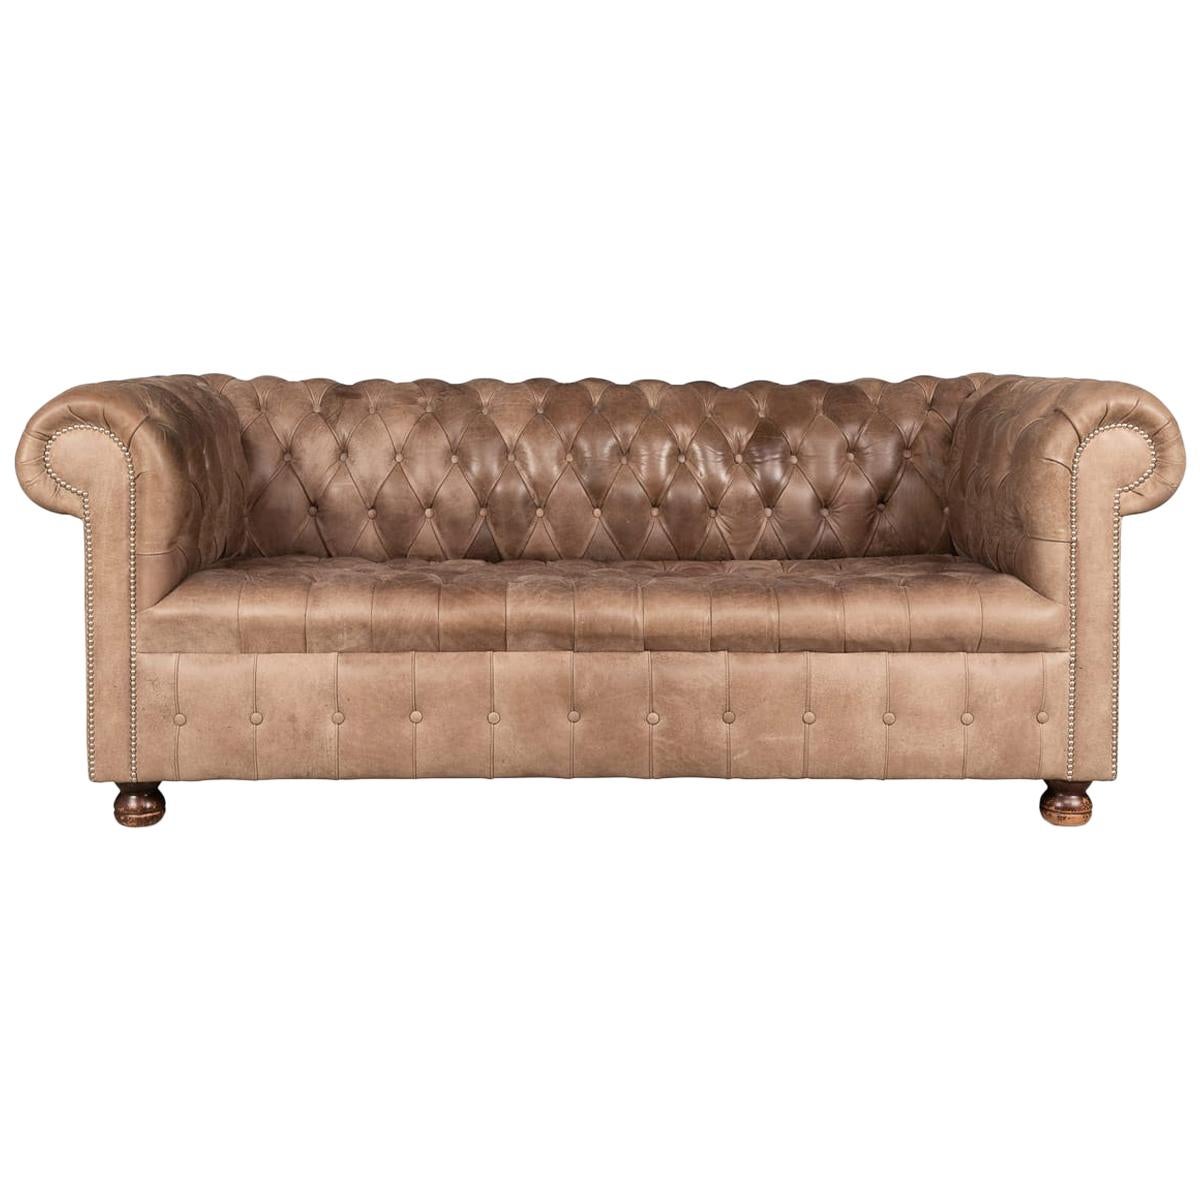 20th Century Two-Seat Chesterfield Leather Sofa with Button Down Seat